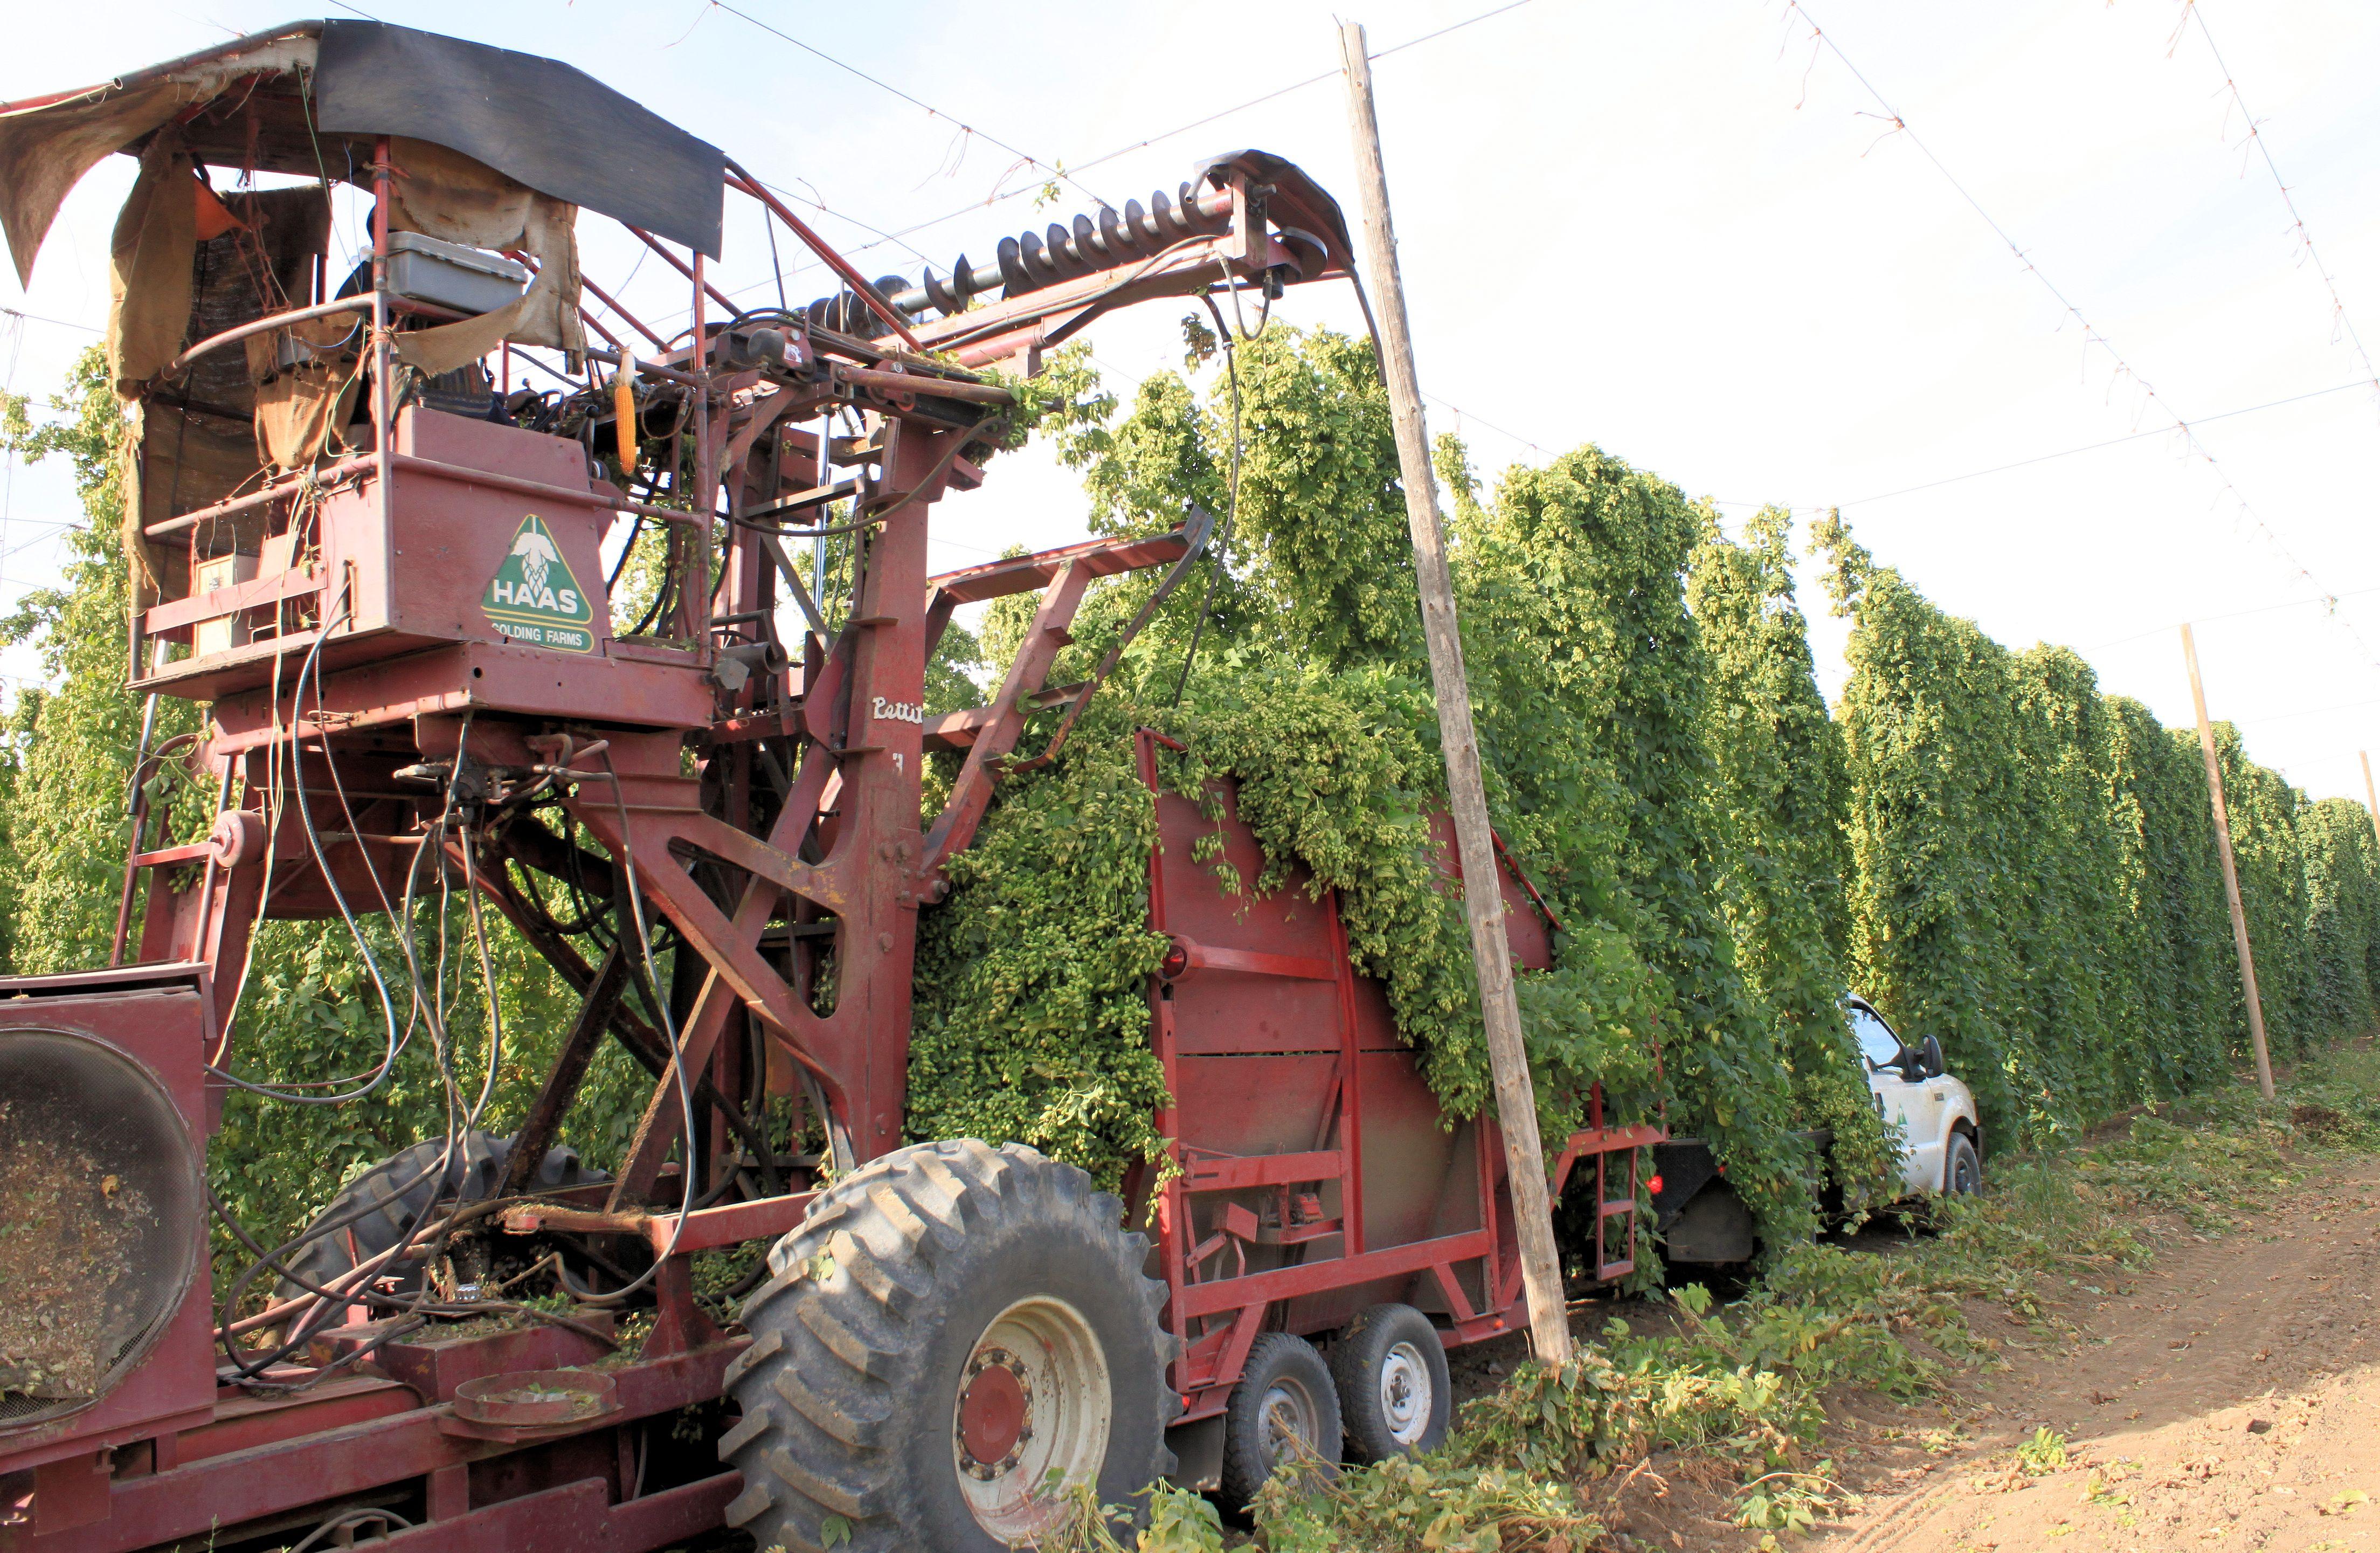 07 Hop harvest - top cutter dropping vines into trailer for transport to the processing plant nearby